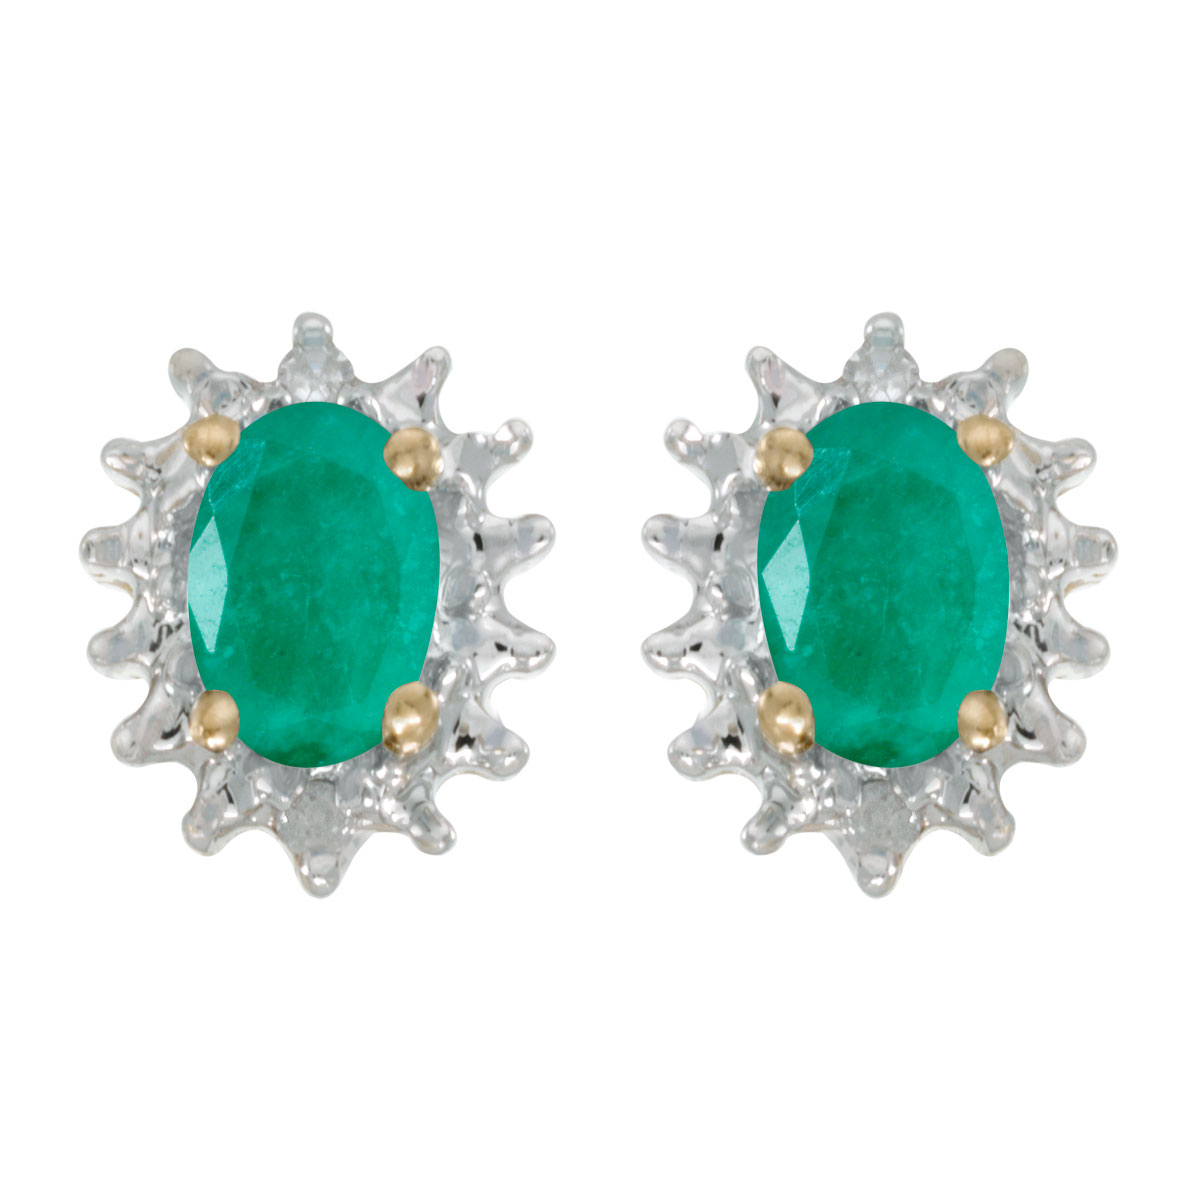 These 14k yellow gold oval emerald and diamond earrings feature 6x4 mm genuine natural emeralds w...